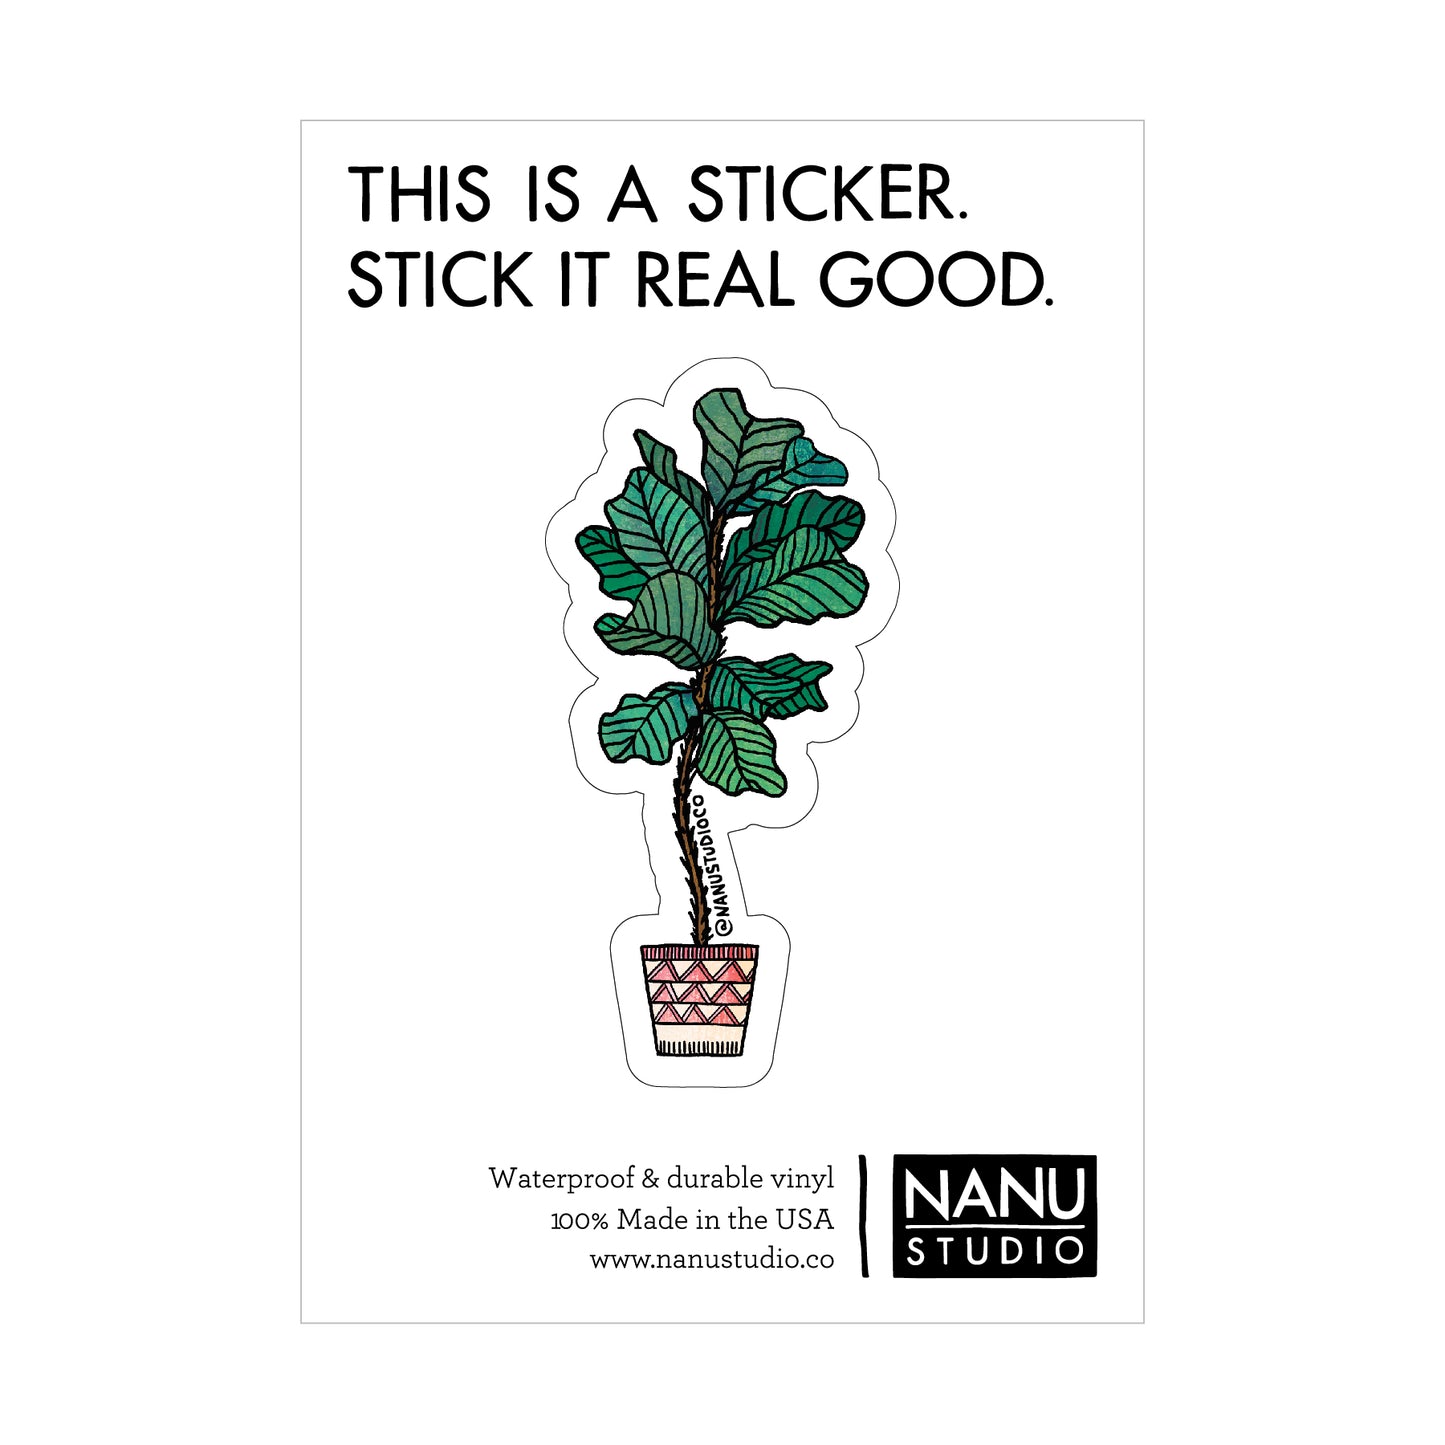 An illustrated sticker featuring a fiddle fig in a pot with a geometric triangle pattern